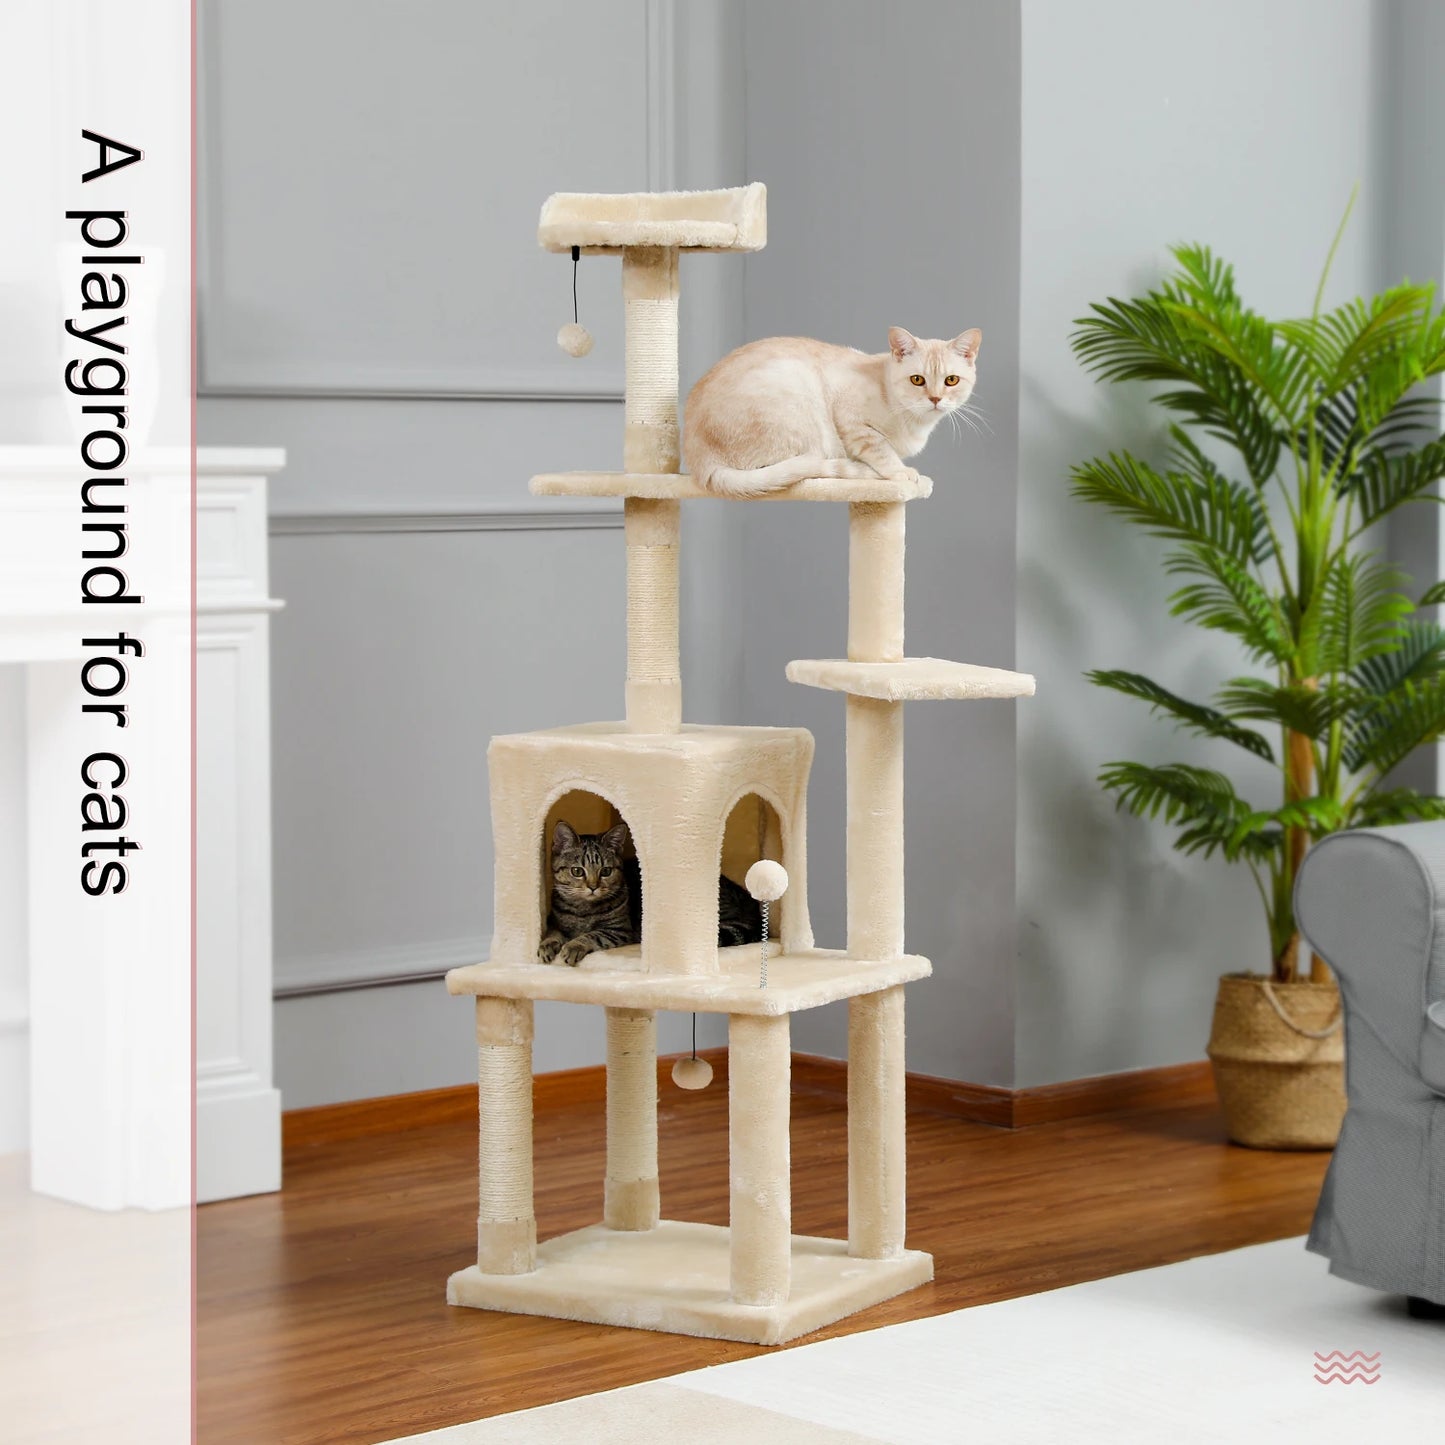 145cm Multi-Level Cat Climbing Tree with Scratching Posts & Play Features